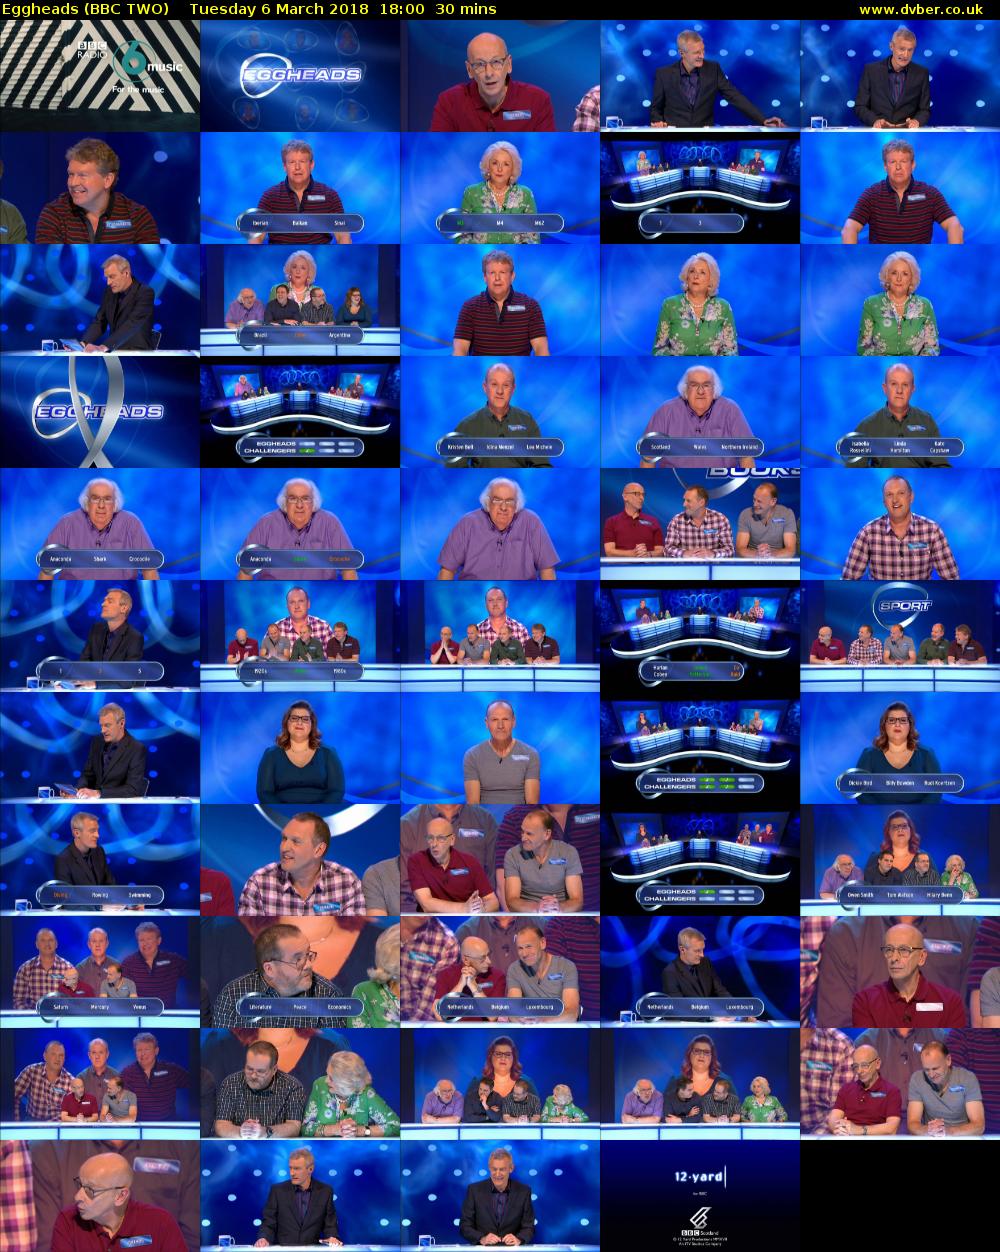 Eggheads (BBC TWO) Tuesday 6 March 2018 18:00 - 18:30